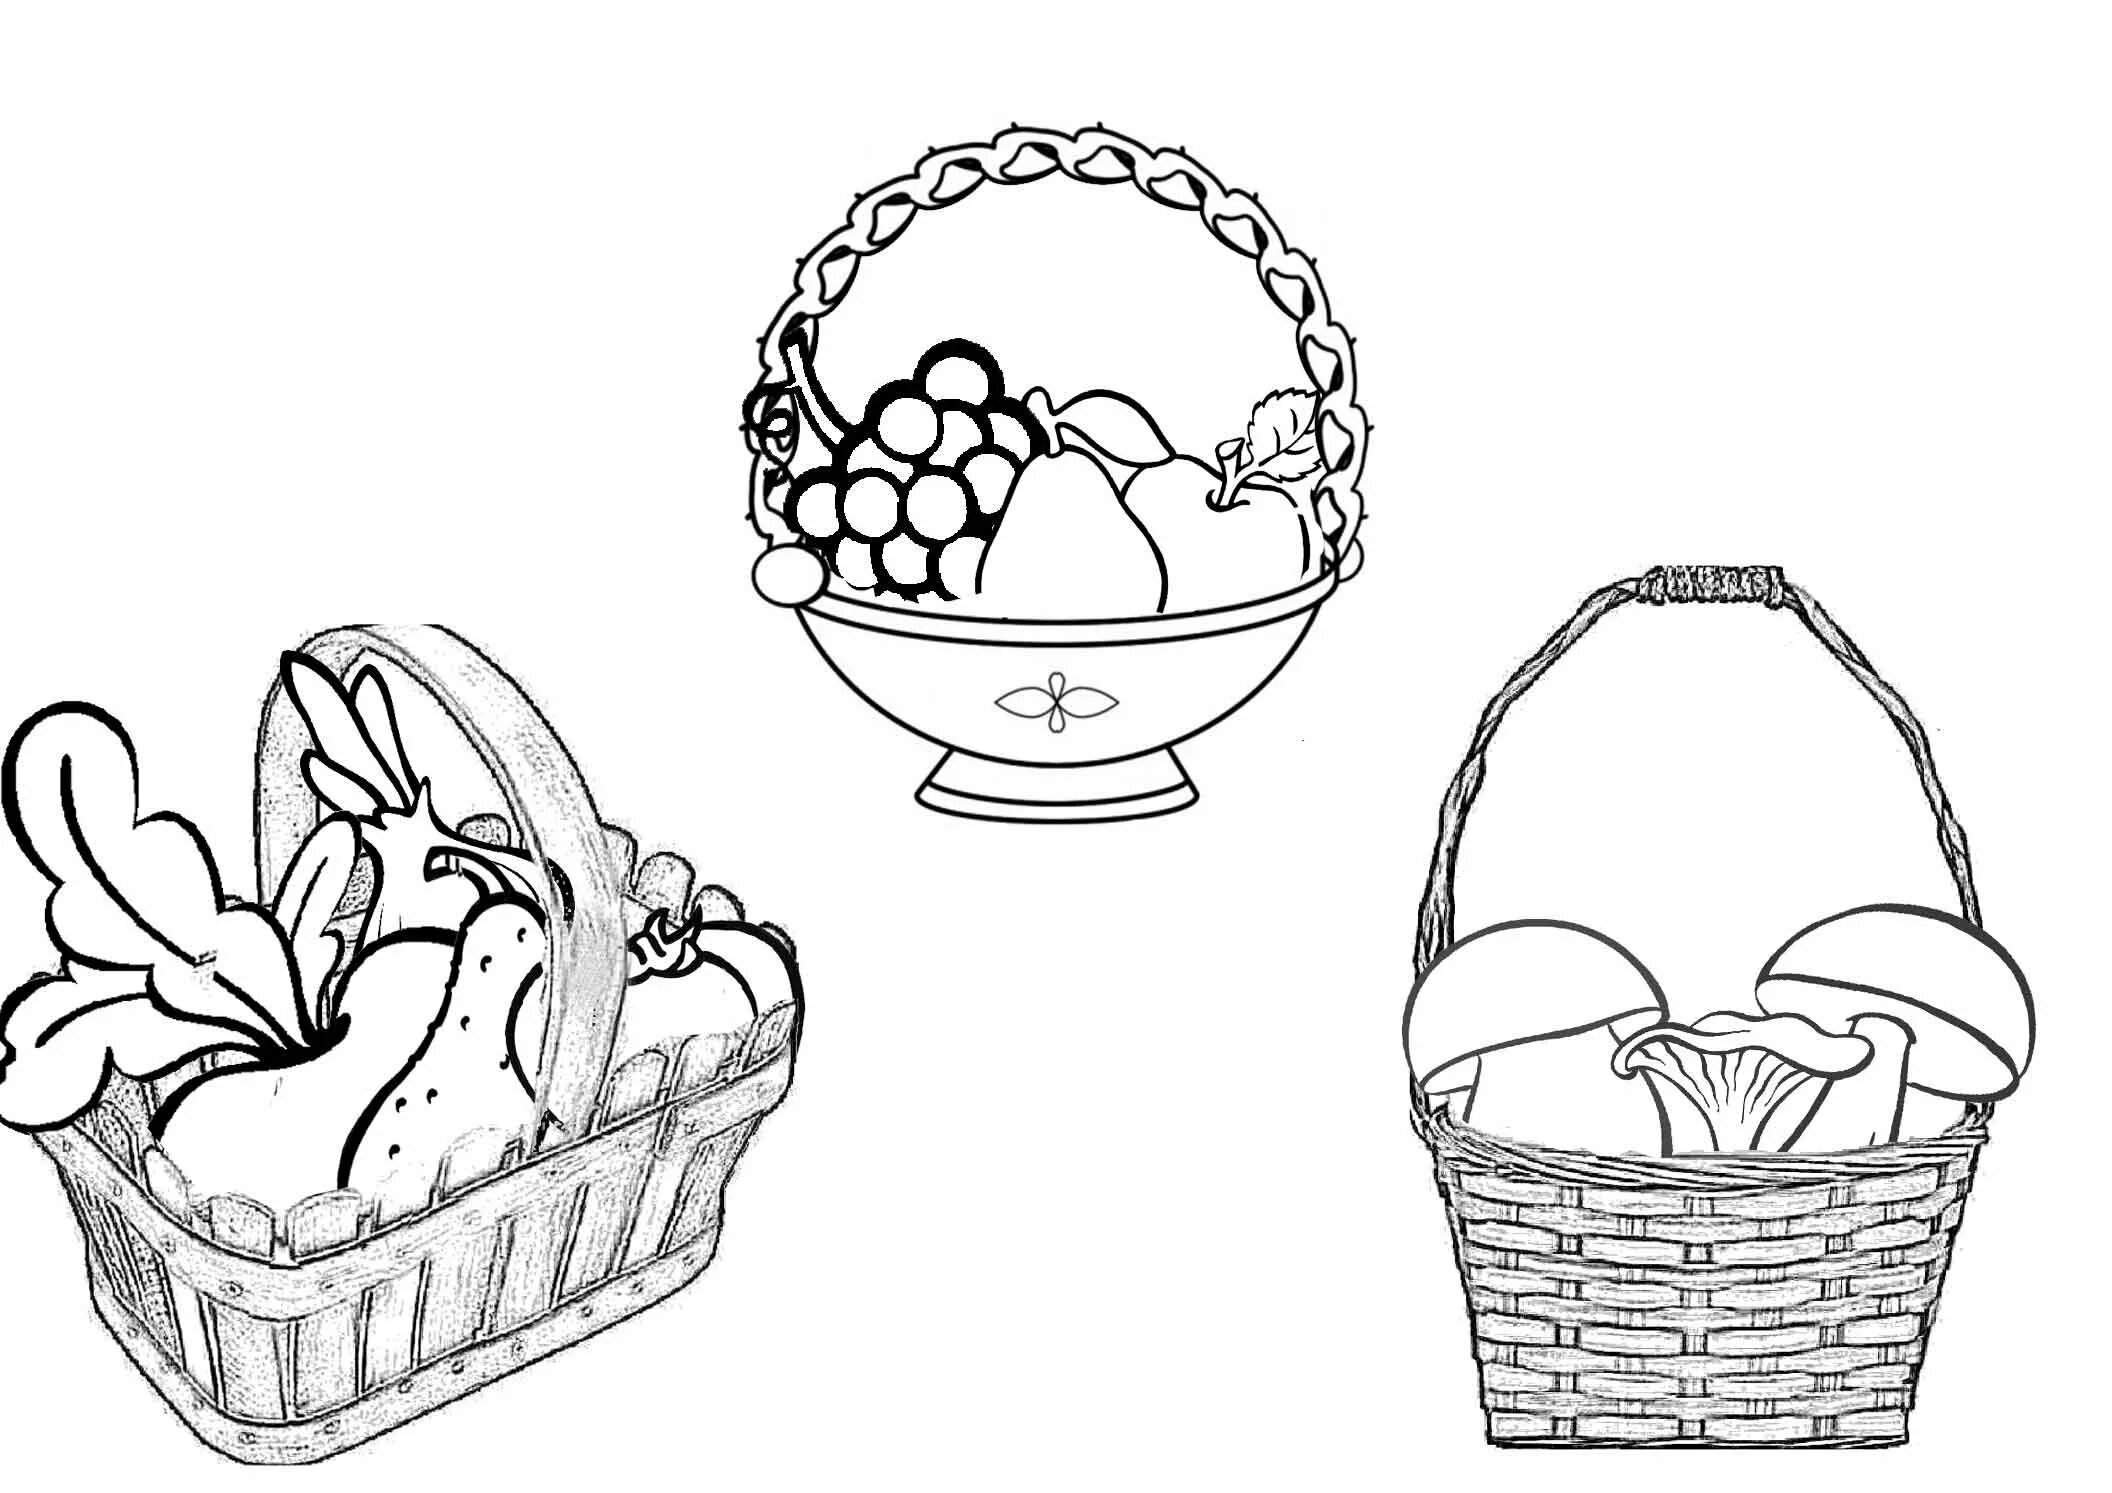 Coloring bright basket with mushrooms